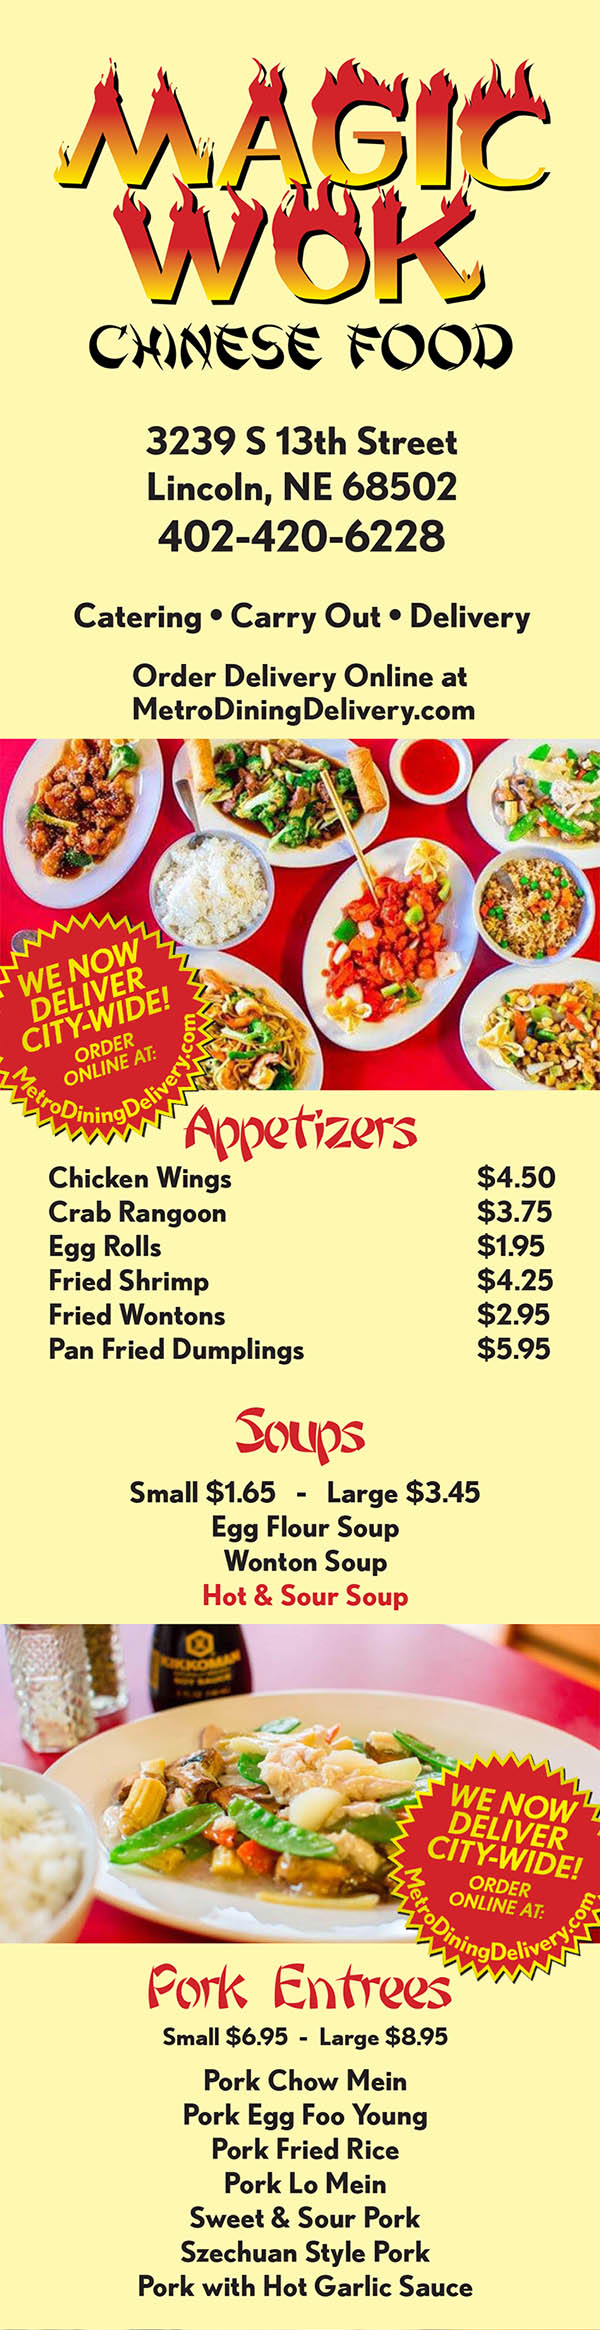 Magic Wok Chinese Food Menu - Lincoln Nebraska - Page 1
Magic Wok
CHINESE FOOD
3239 S 13th Street
Lincoln, NE 68502
402-420-6228
Catering  Carry Out  Delivery